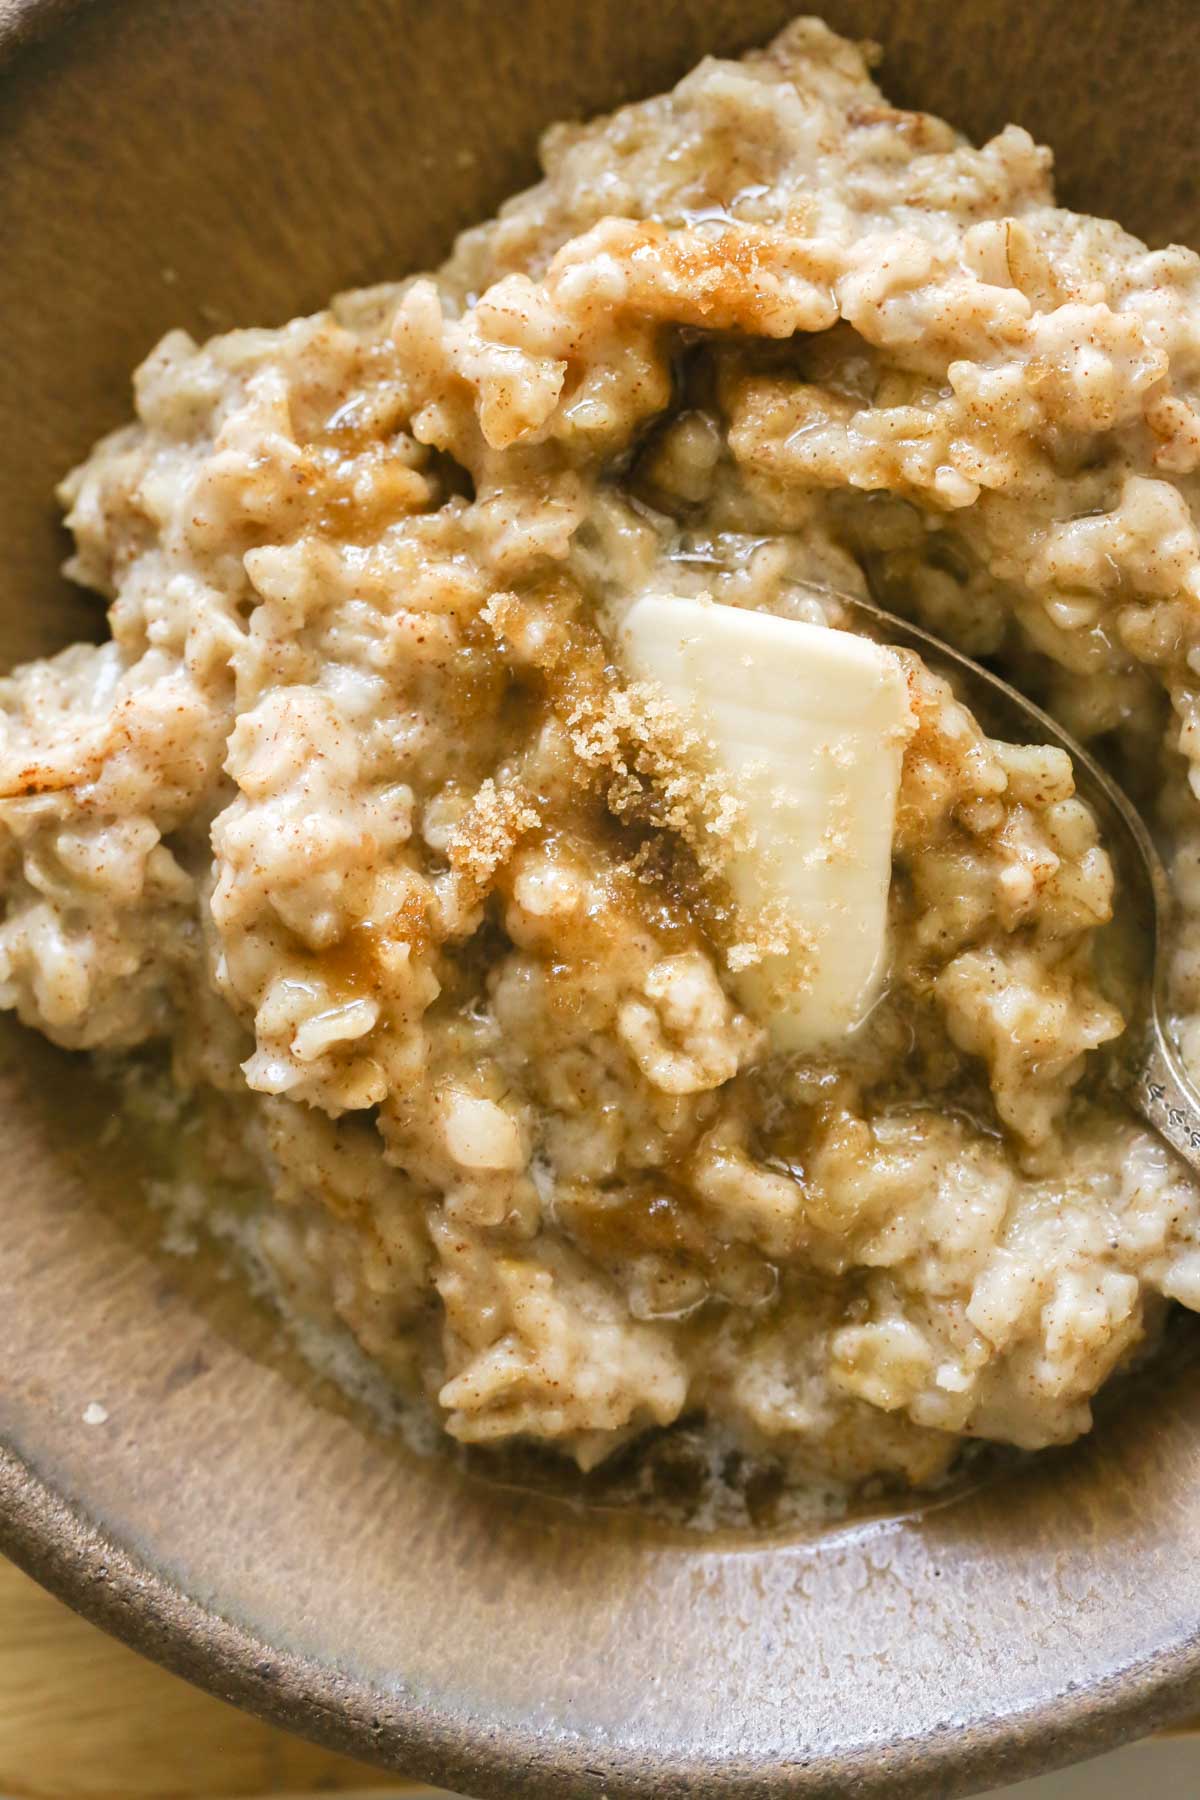 https://d2t88cihvgacbj.cloudfront.net/manage/wp-content/uploads/2020/11/How-to-Make-Good-Oatmeal-3.jpg?x24658